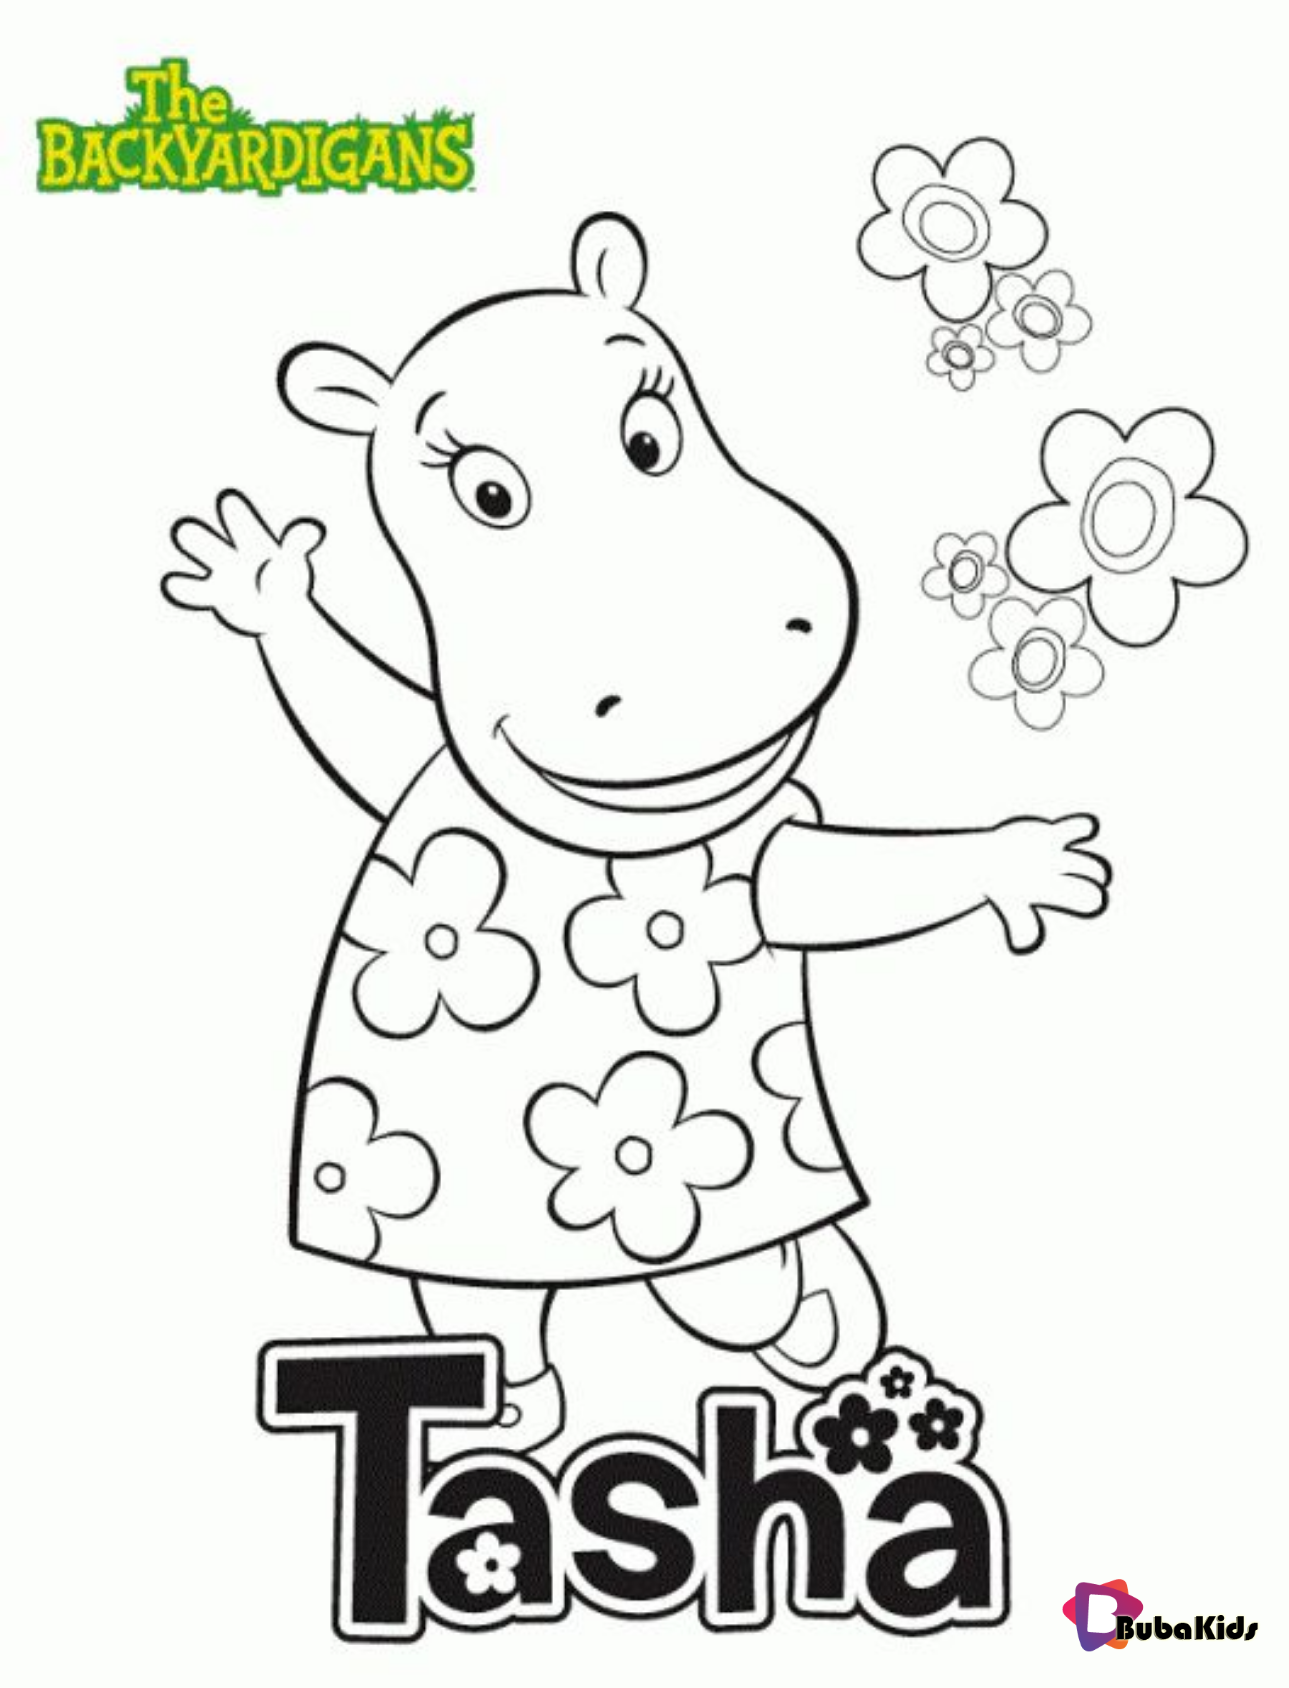 Tasha From The Backyardigans Coloring Pages Wallpaper